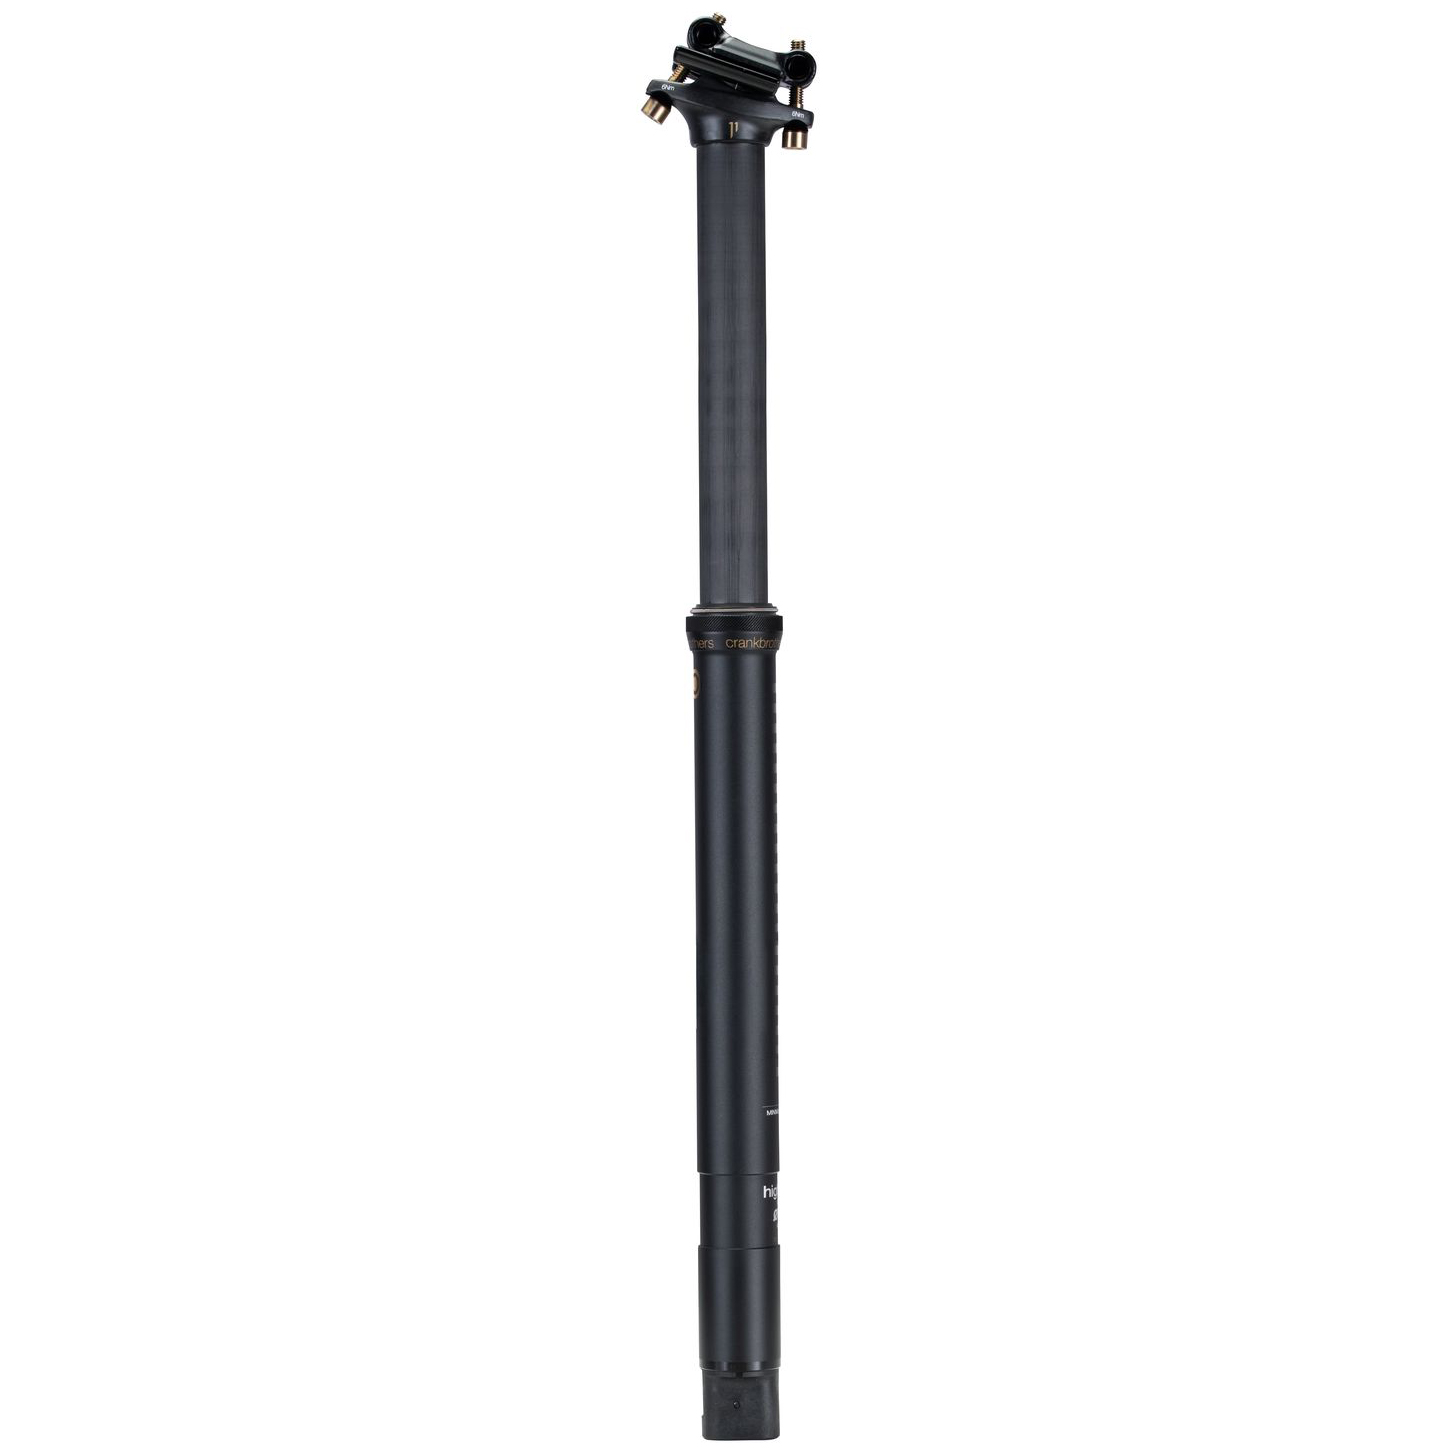 Picture of Crankbrothers Highline 11 Dropper Seatpost | black - 170mm Travel